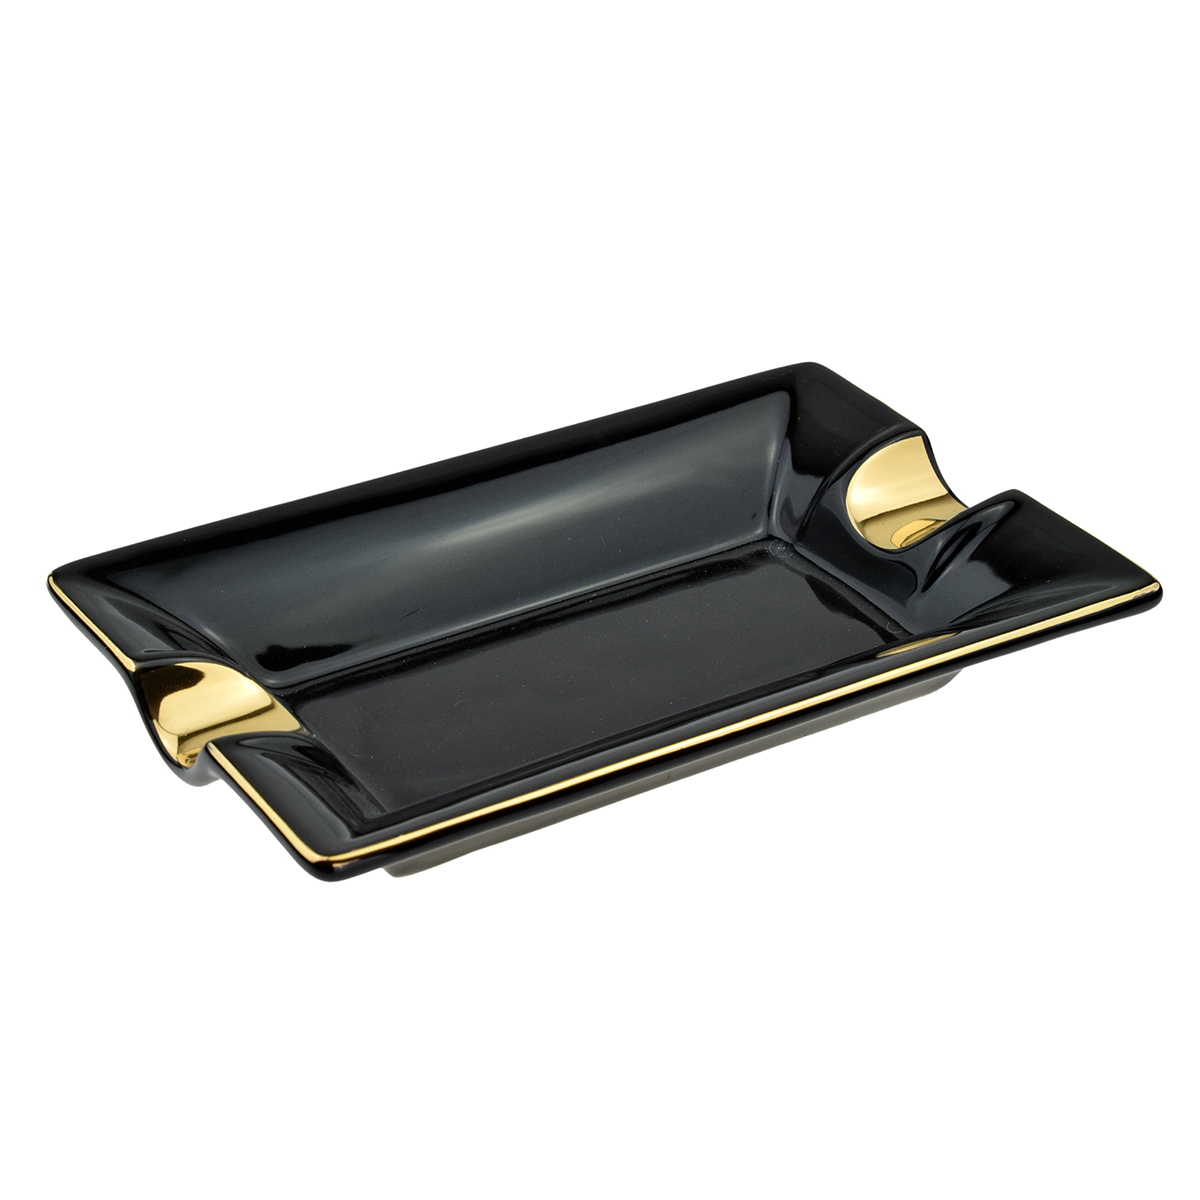 Cigar Ashtray Two Position Ceramic Black And Gold Colour Approx 18 x 12cm Boxed 1